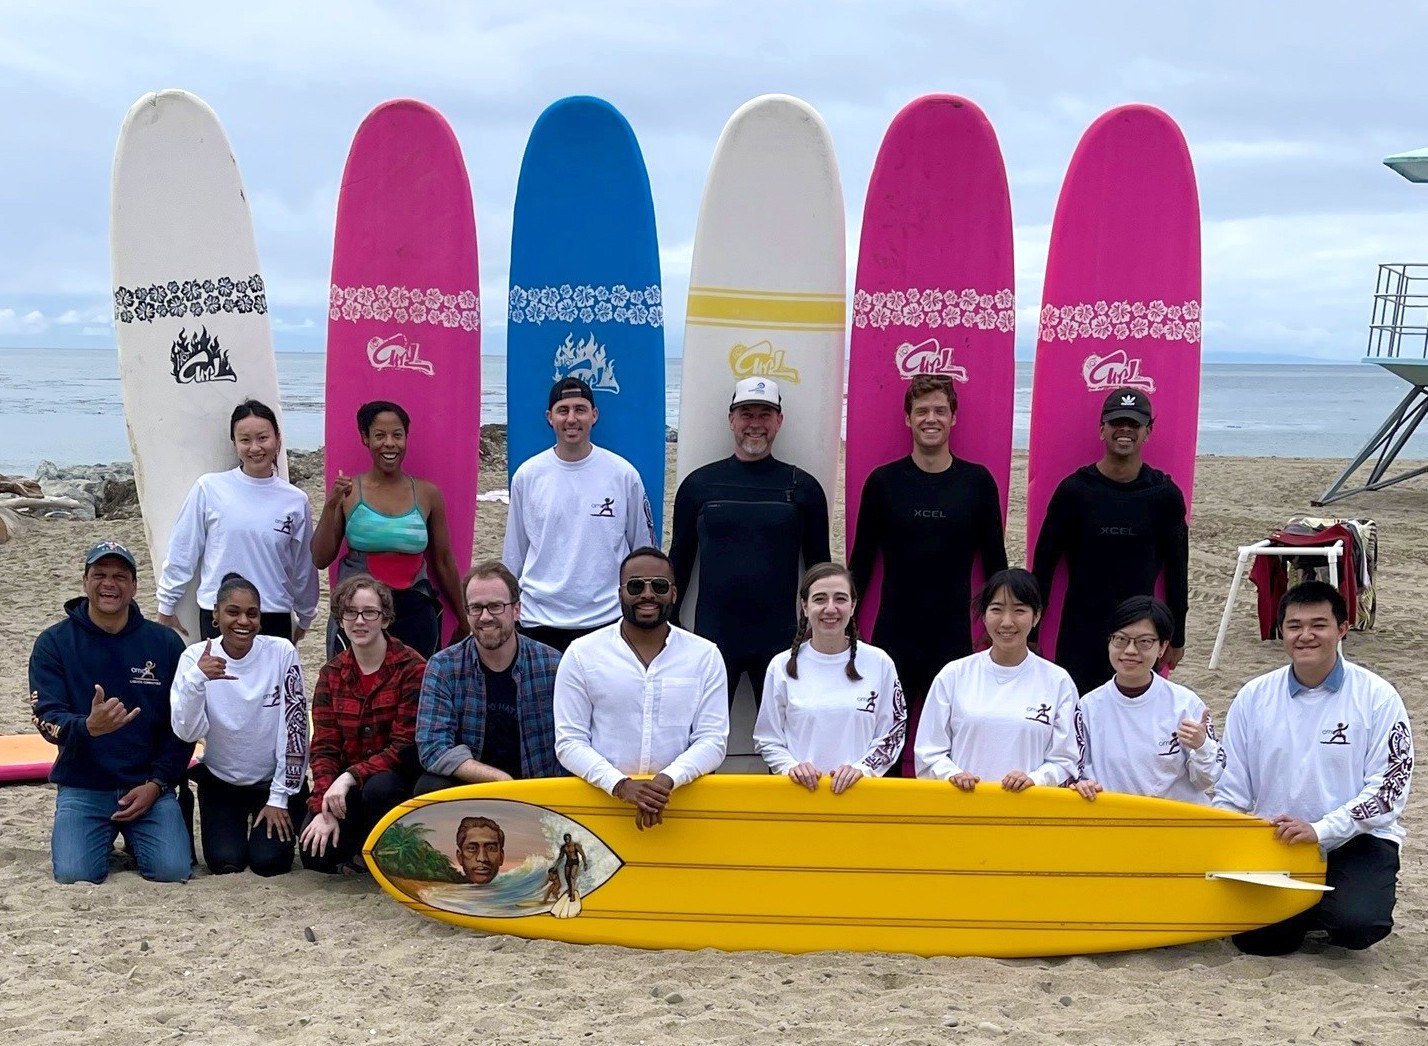 The annual Orrick surf trip for the summer class of ’23 – a tradition since 1999